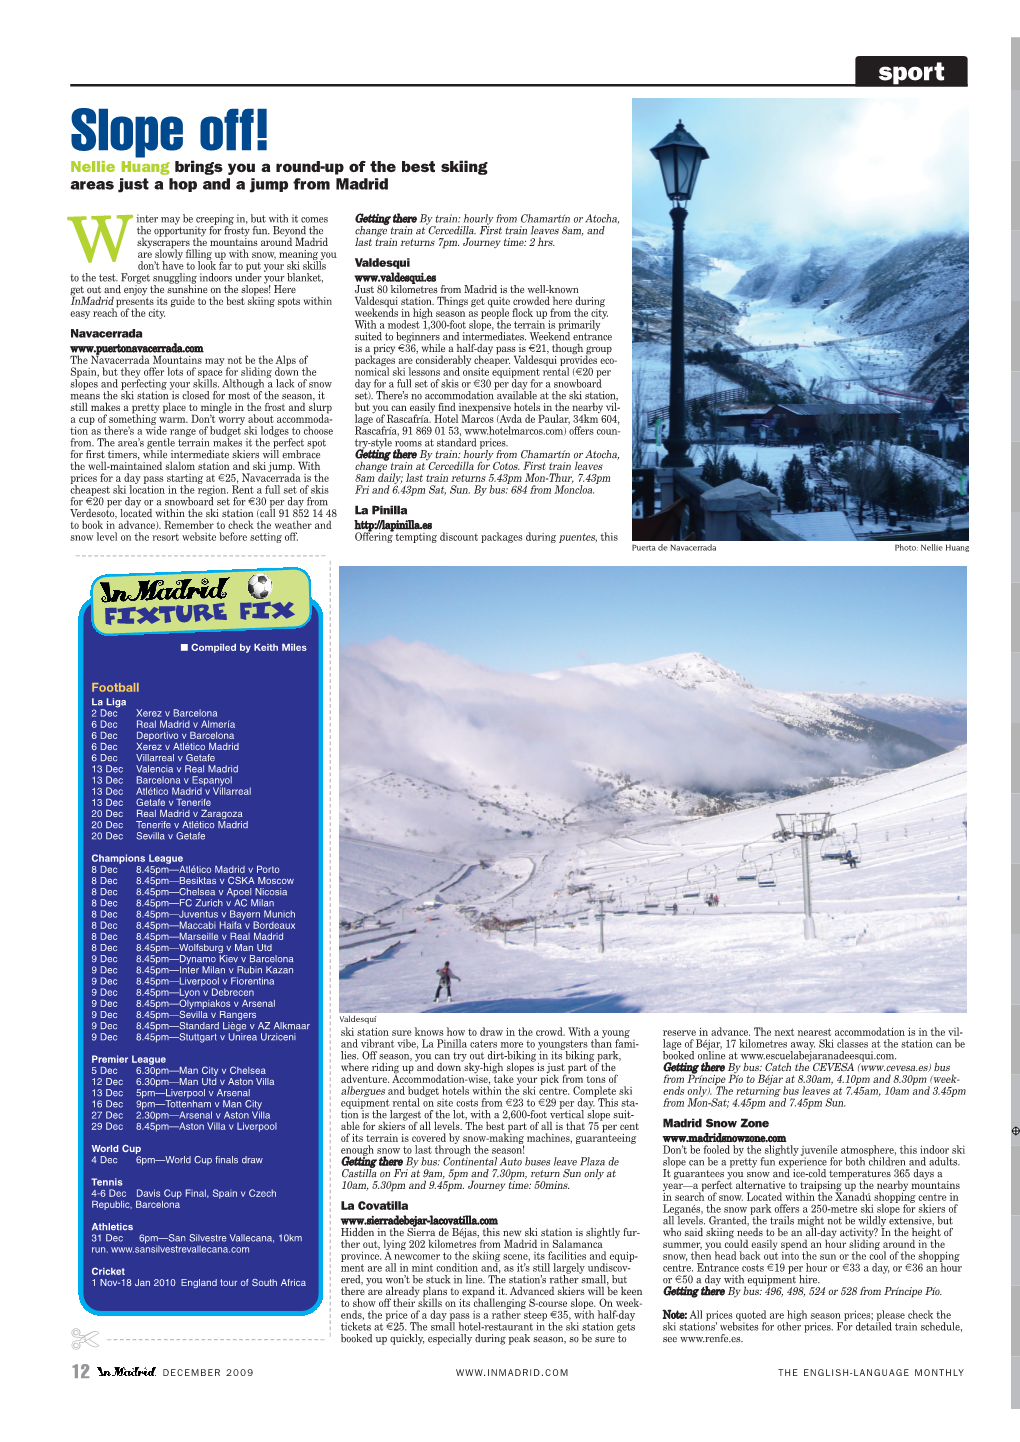 Slope Off! Nellie Huang Brings You a Round-Up of the Best Skiing Areas Just a Hop and a Jump from Madrid